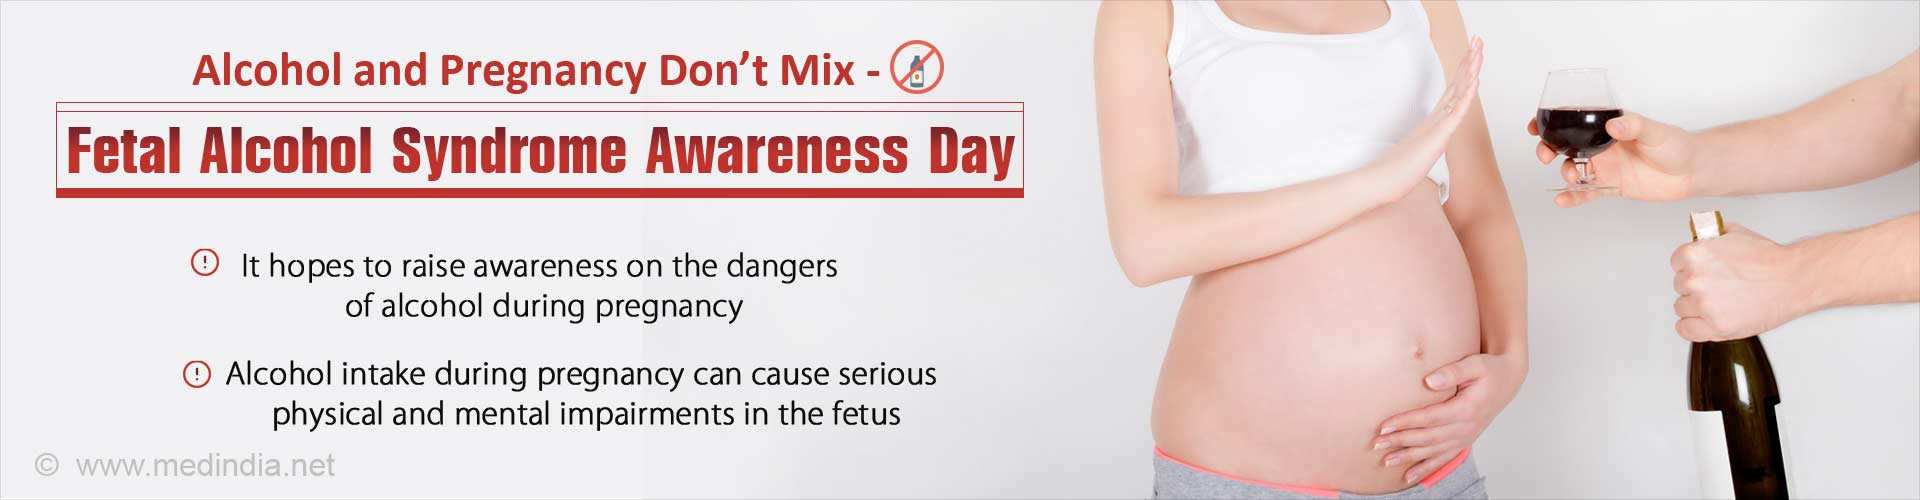 Alcohol and Pregnancy Don''t Mix Fetal Alcohol Syndrome Awareness Day
- It hopes to raise awareness on the dangers of alcohol during pregnancy
- Alcohol intake during pregnancy can cause serious physical and mental impairments in the fetus
